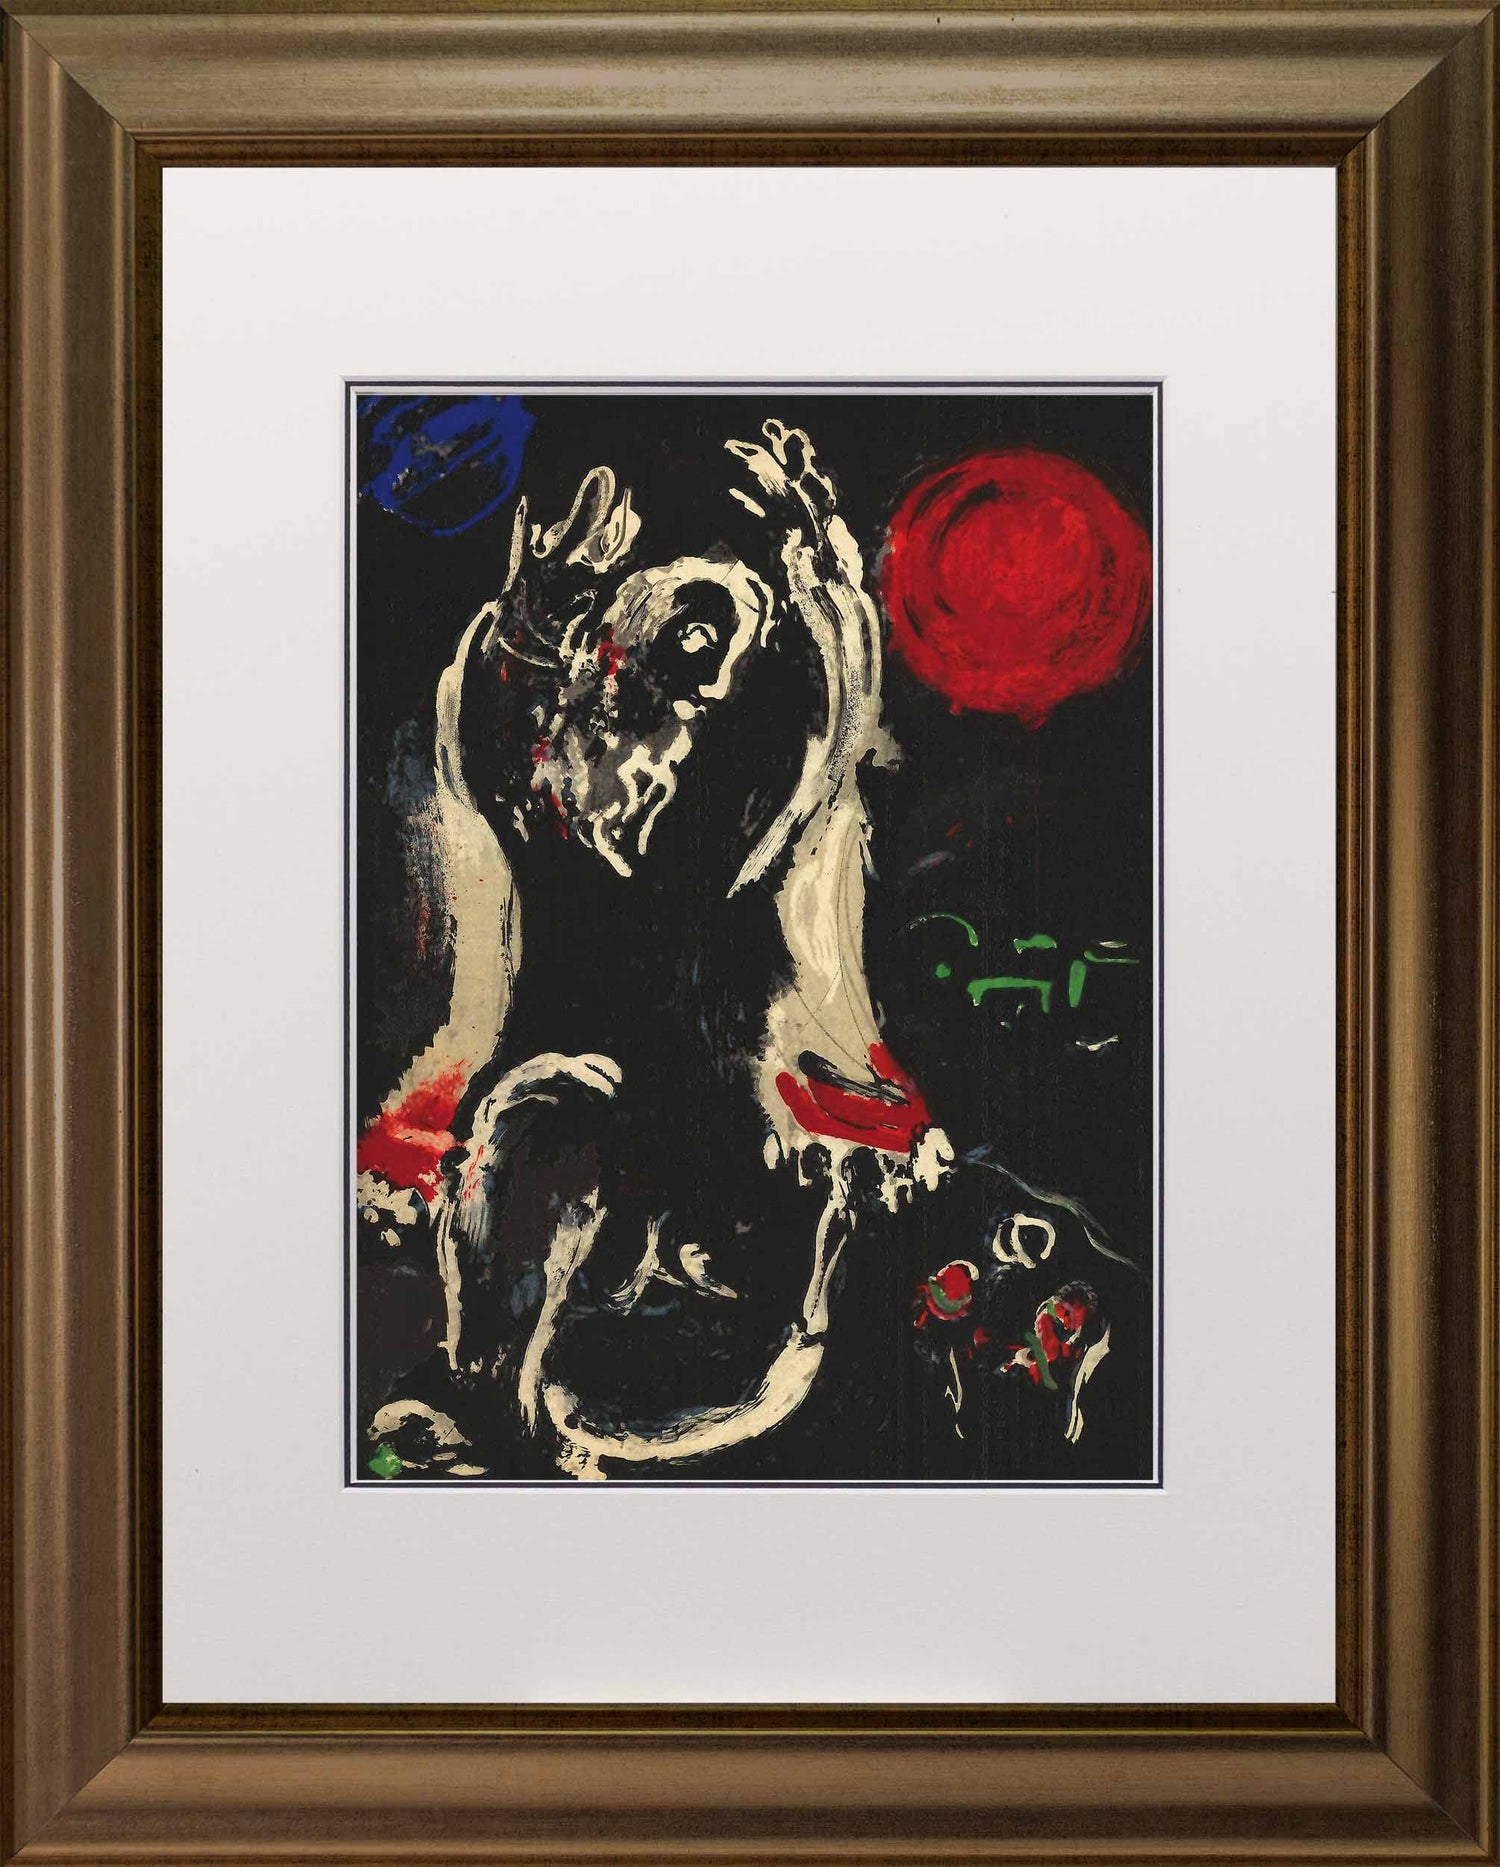 Marc Chagall Isaie lithograph Verve – the bible frame